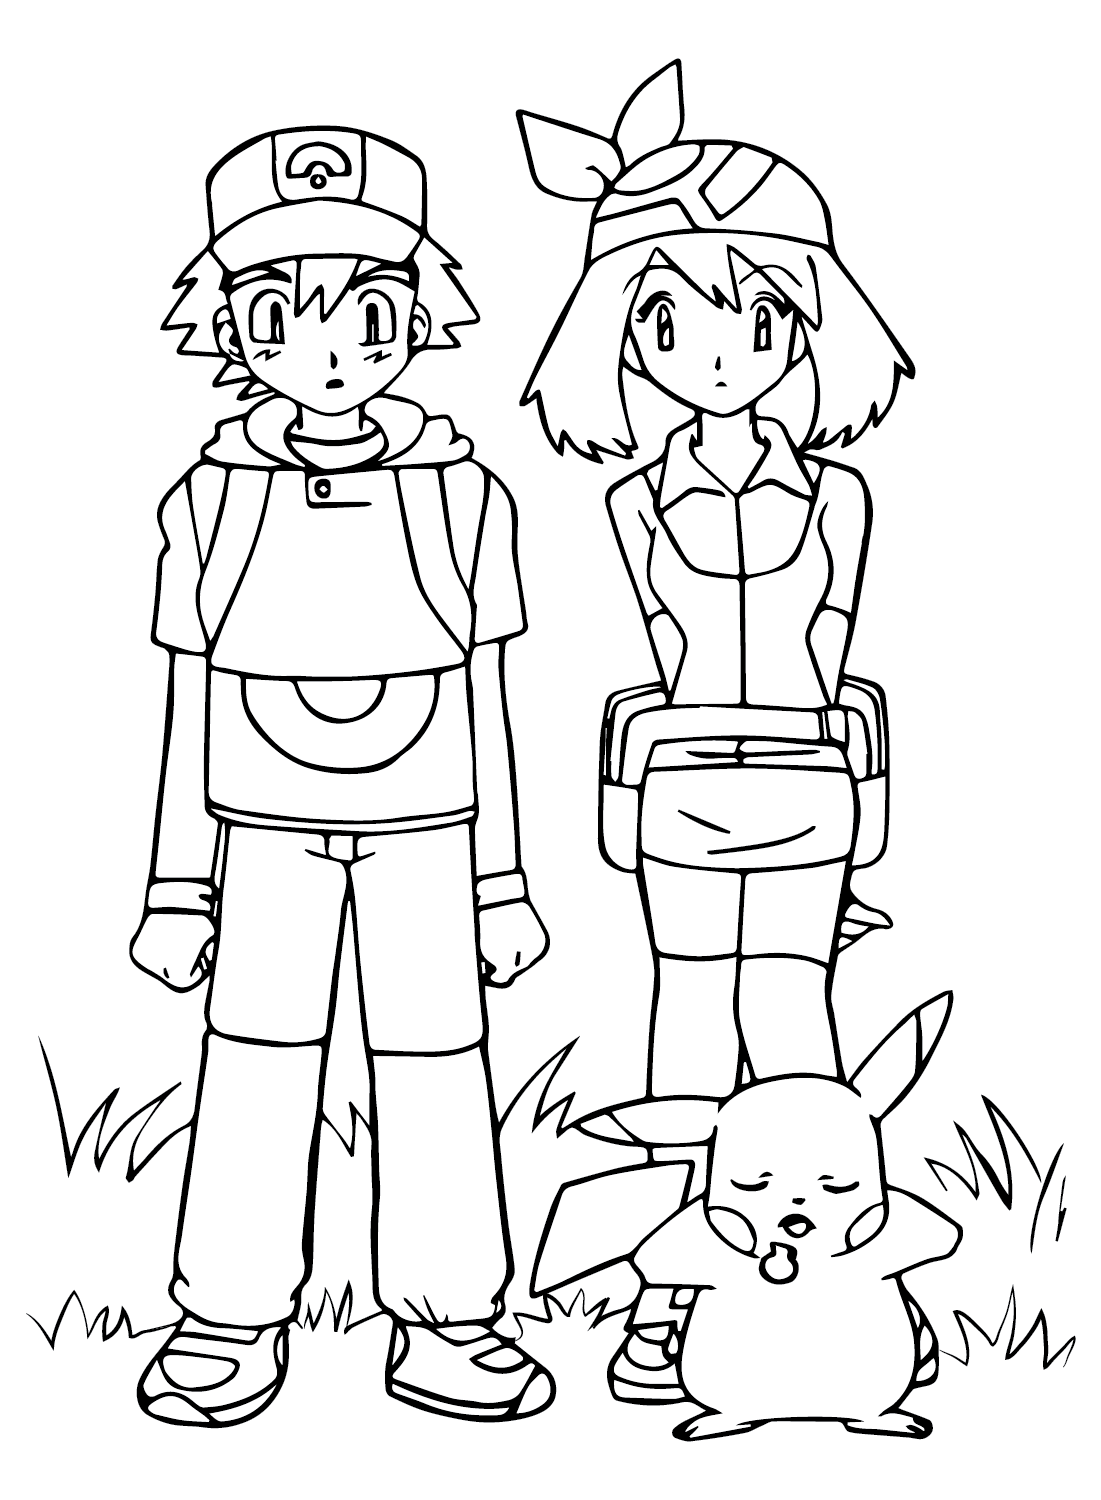 Ash with May Coloring Page Free from Ash Ketchum